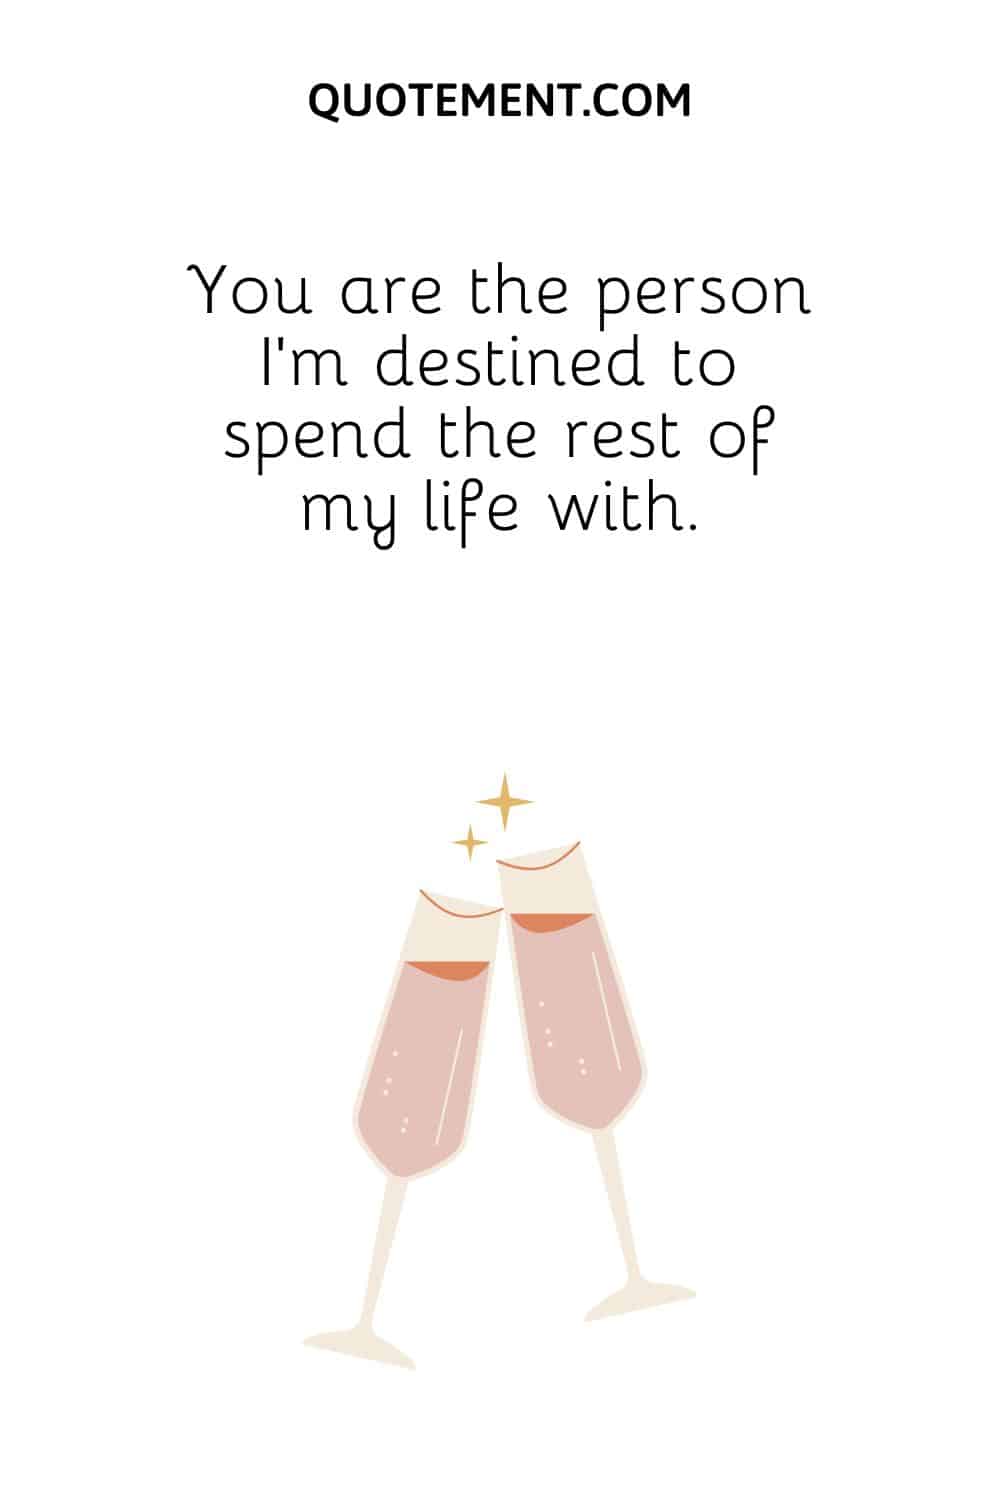 You are the person I'm destined to spend the rest of my life with.